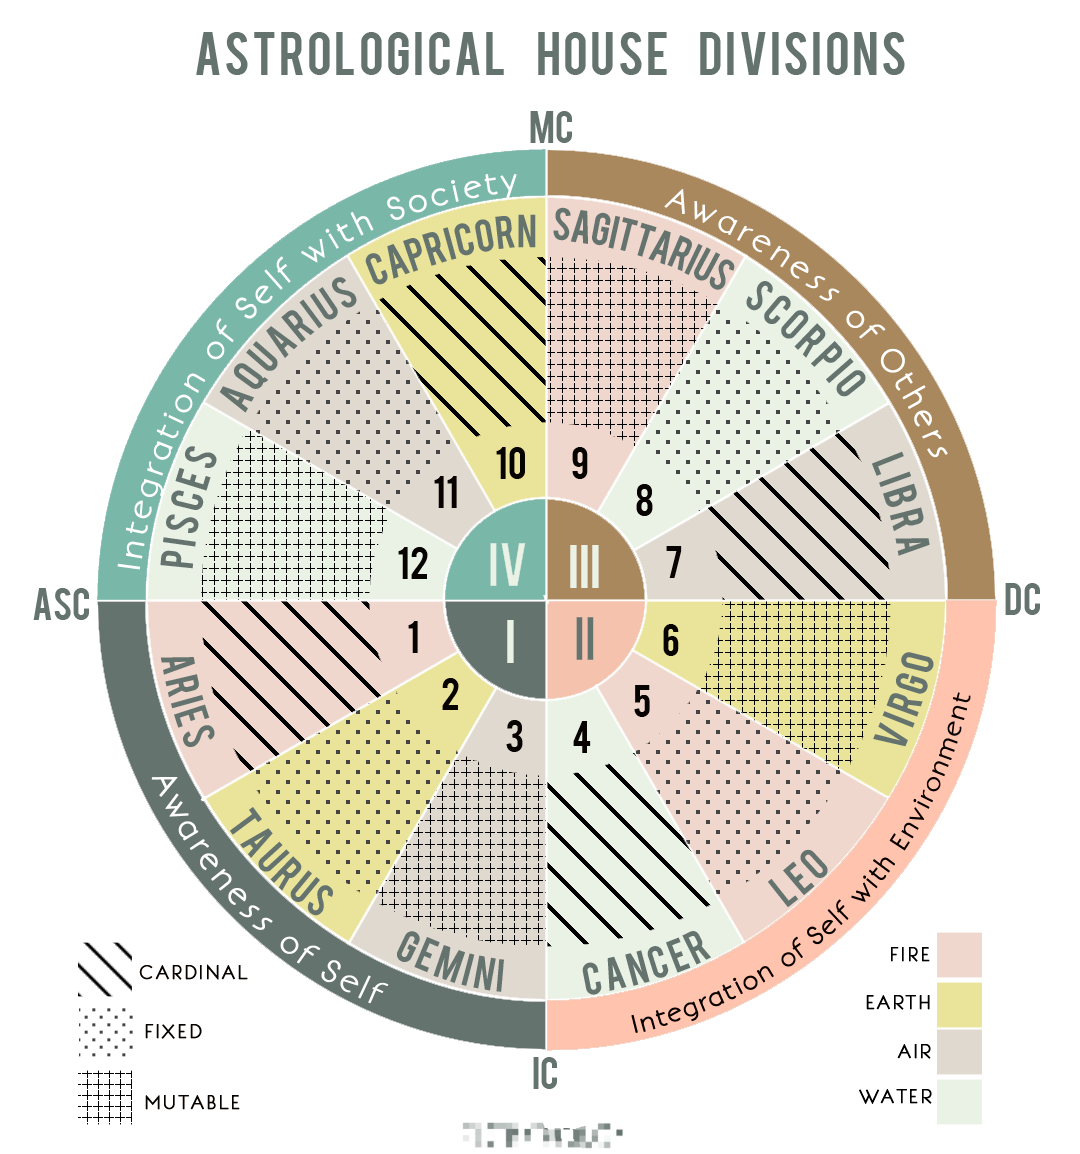 Free Birth Chart With Asteroids